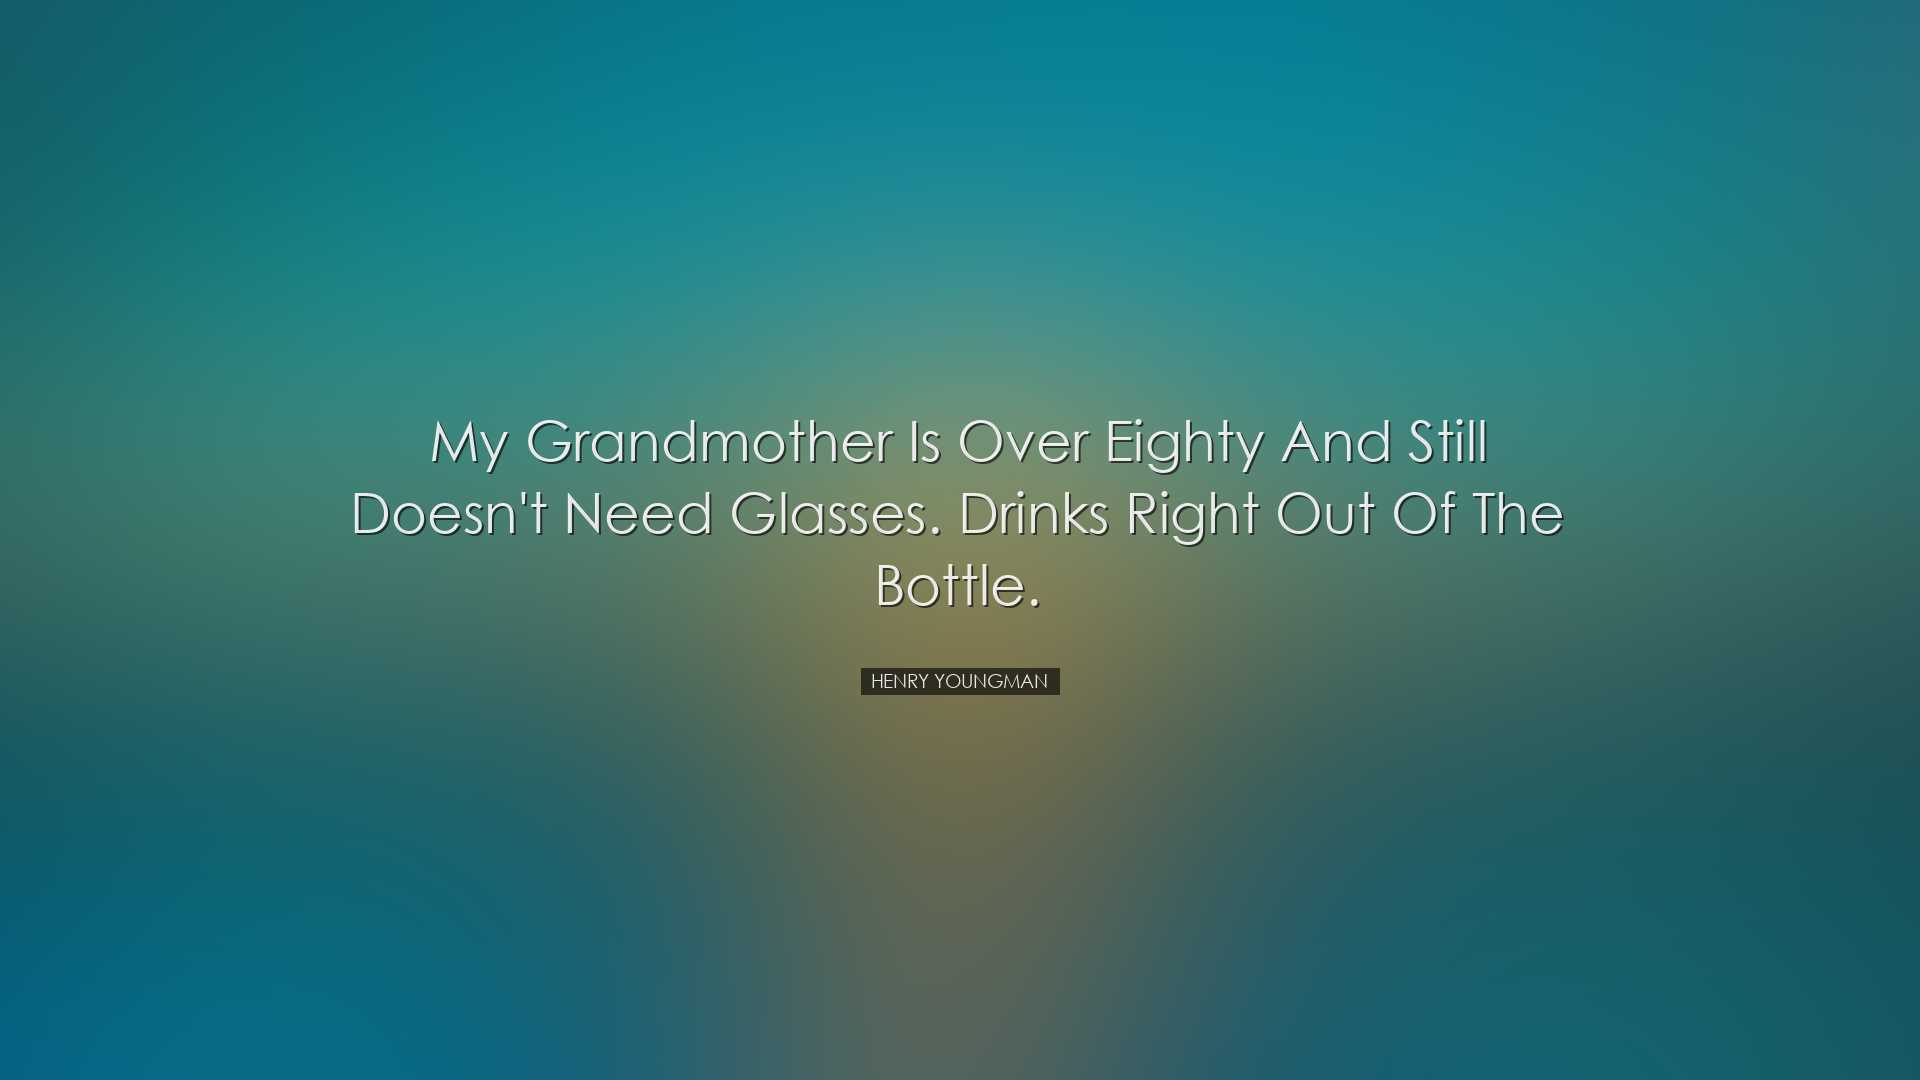 My grandmother is over eighty and still doesn't need glasses. Drin